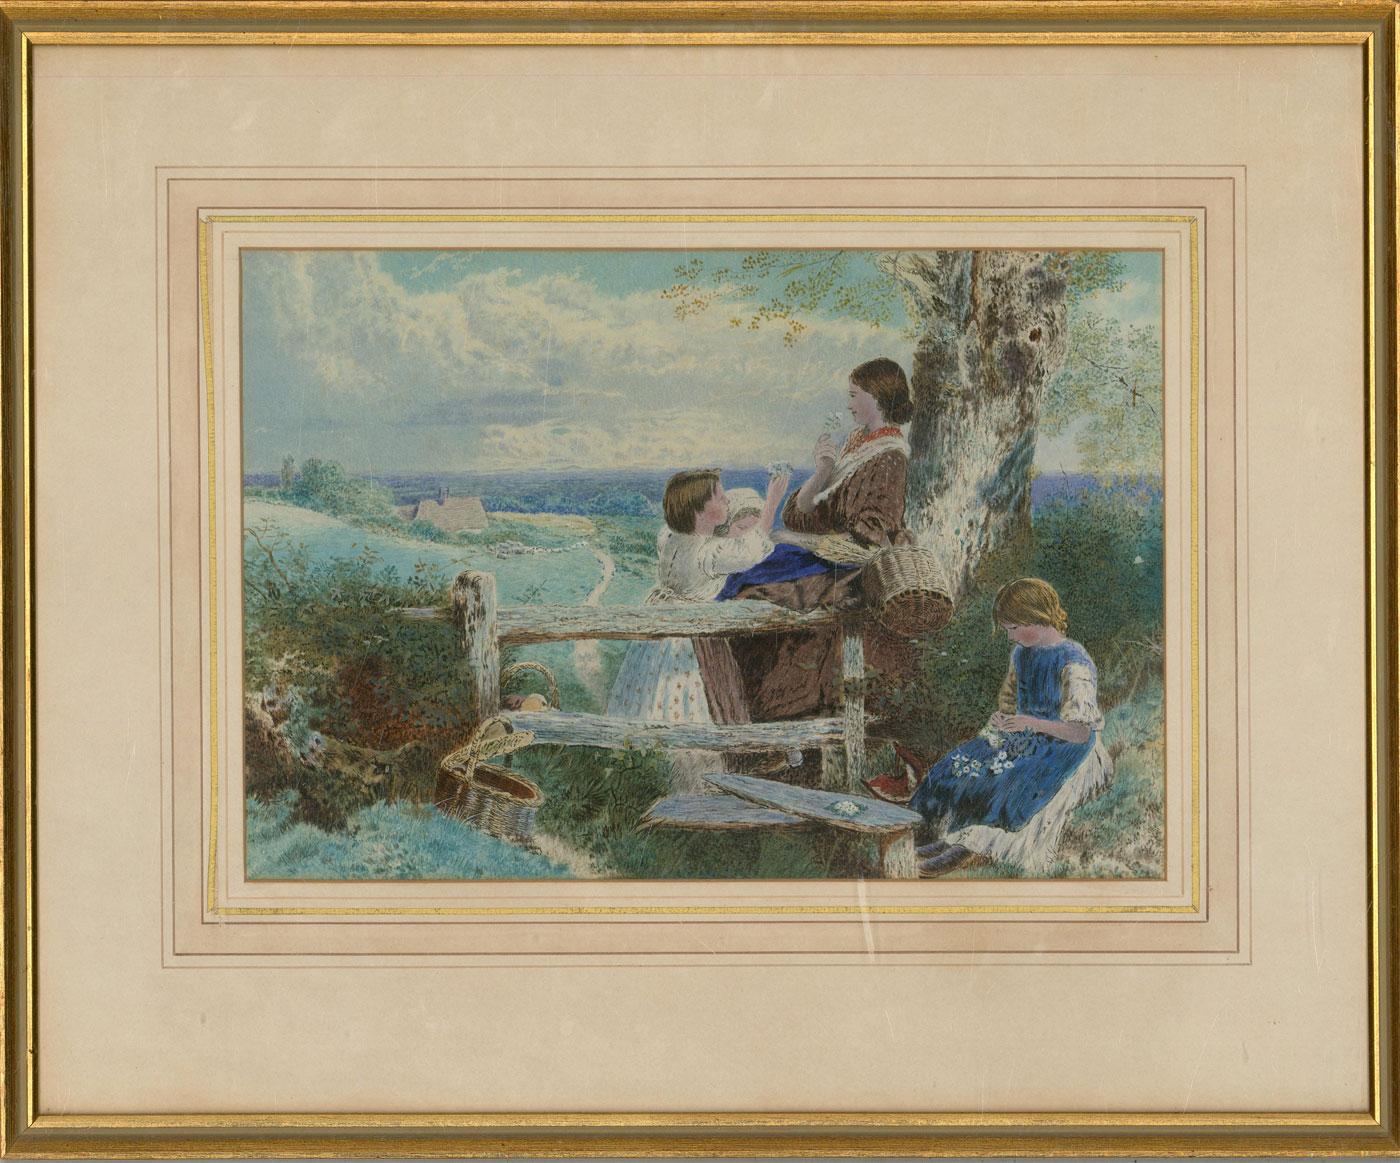 A charming watercolour finished with graphic black hatching, showing a woman and three young girls resting on a style overlooking a beautiful valley. The woman and young girls are smiling and smelling white flowers they have picked. This wholesome